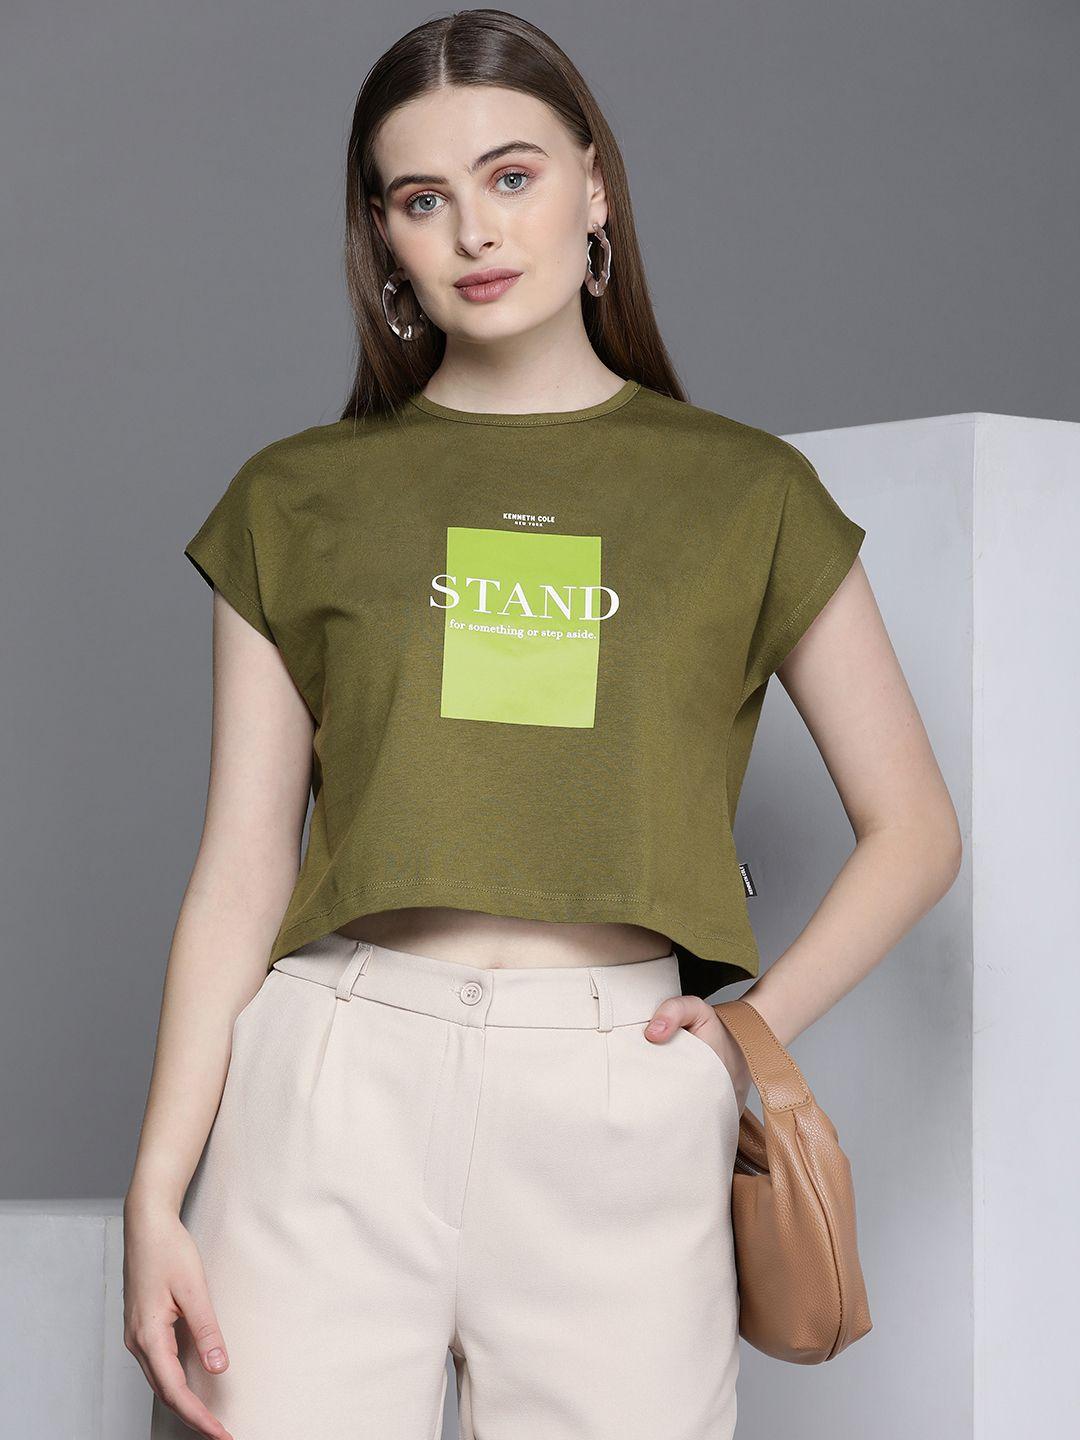 kenneth cole voice tee women olive green pure cotton boxy fit t-shirt